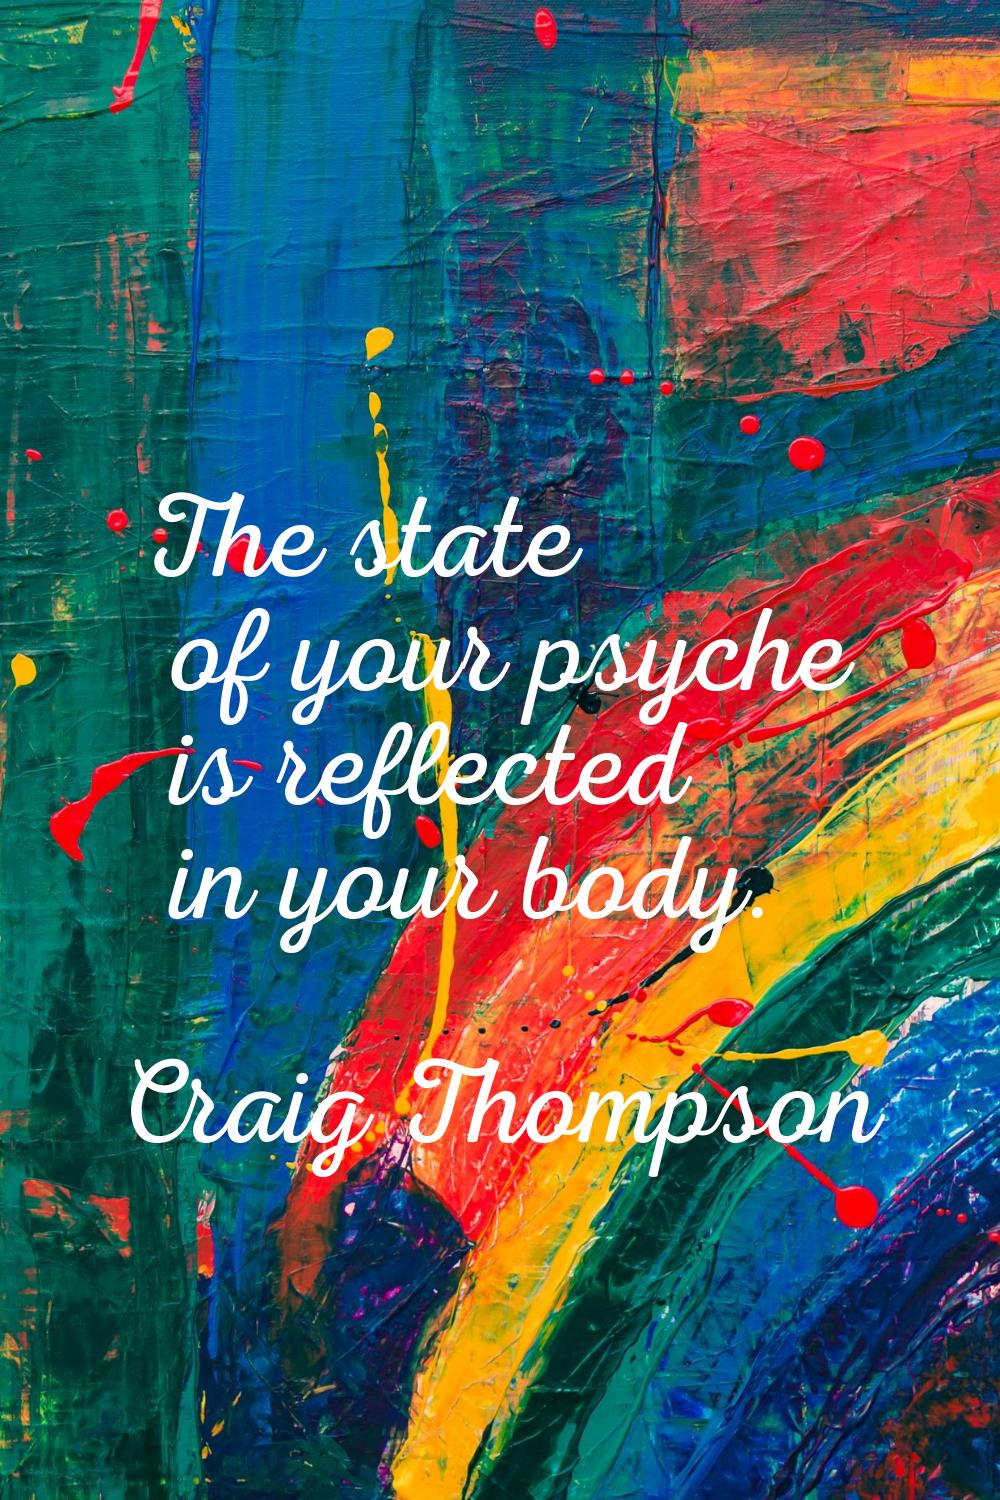 The state of your psyche is reflected in your body.